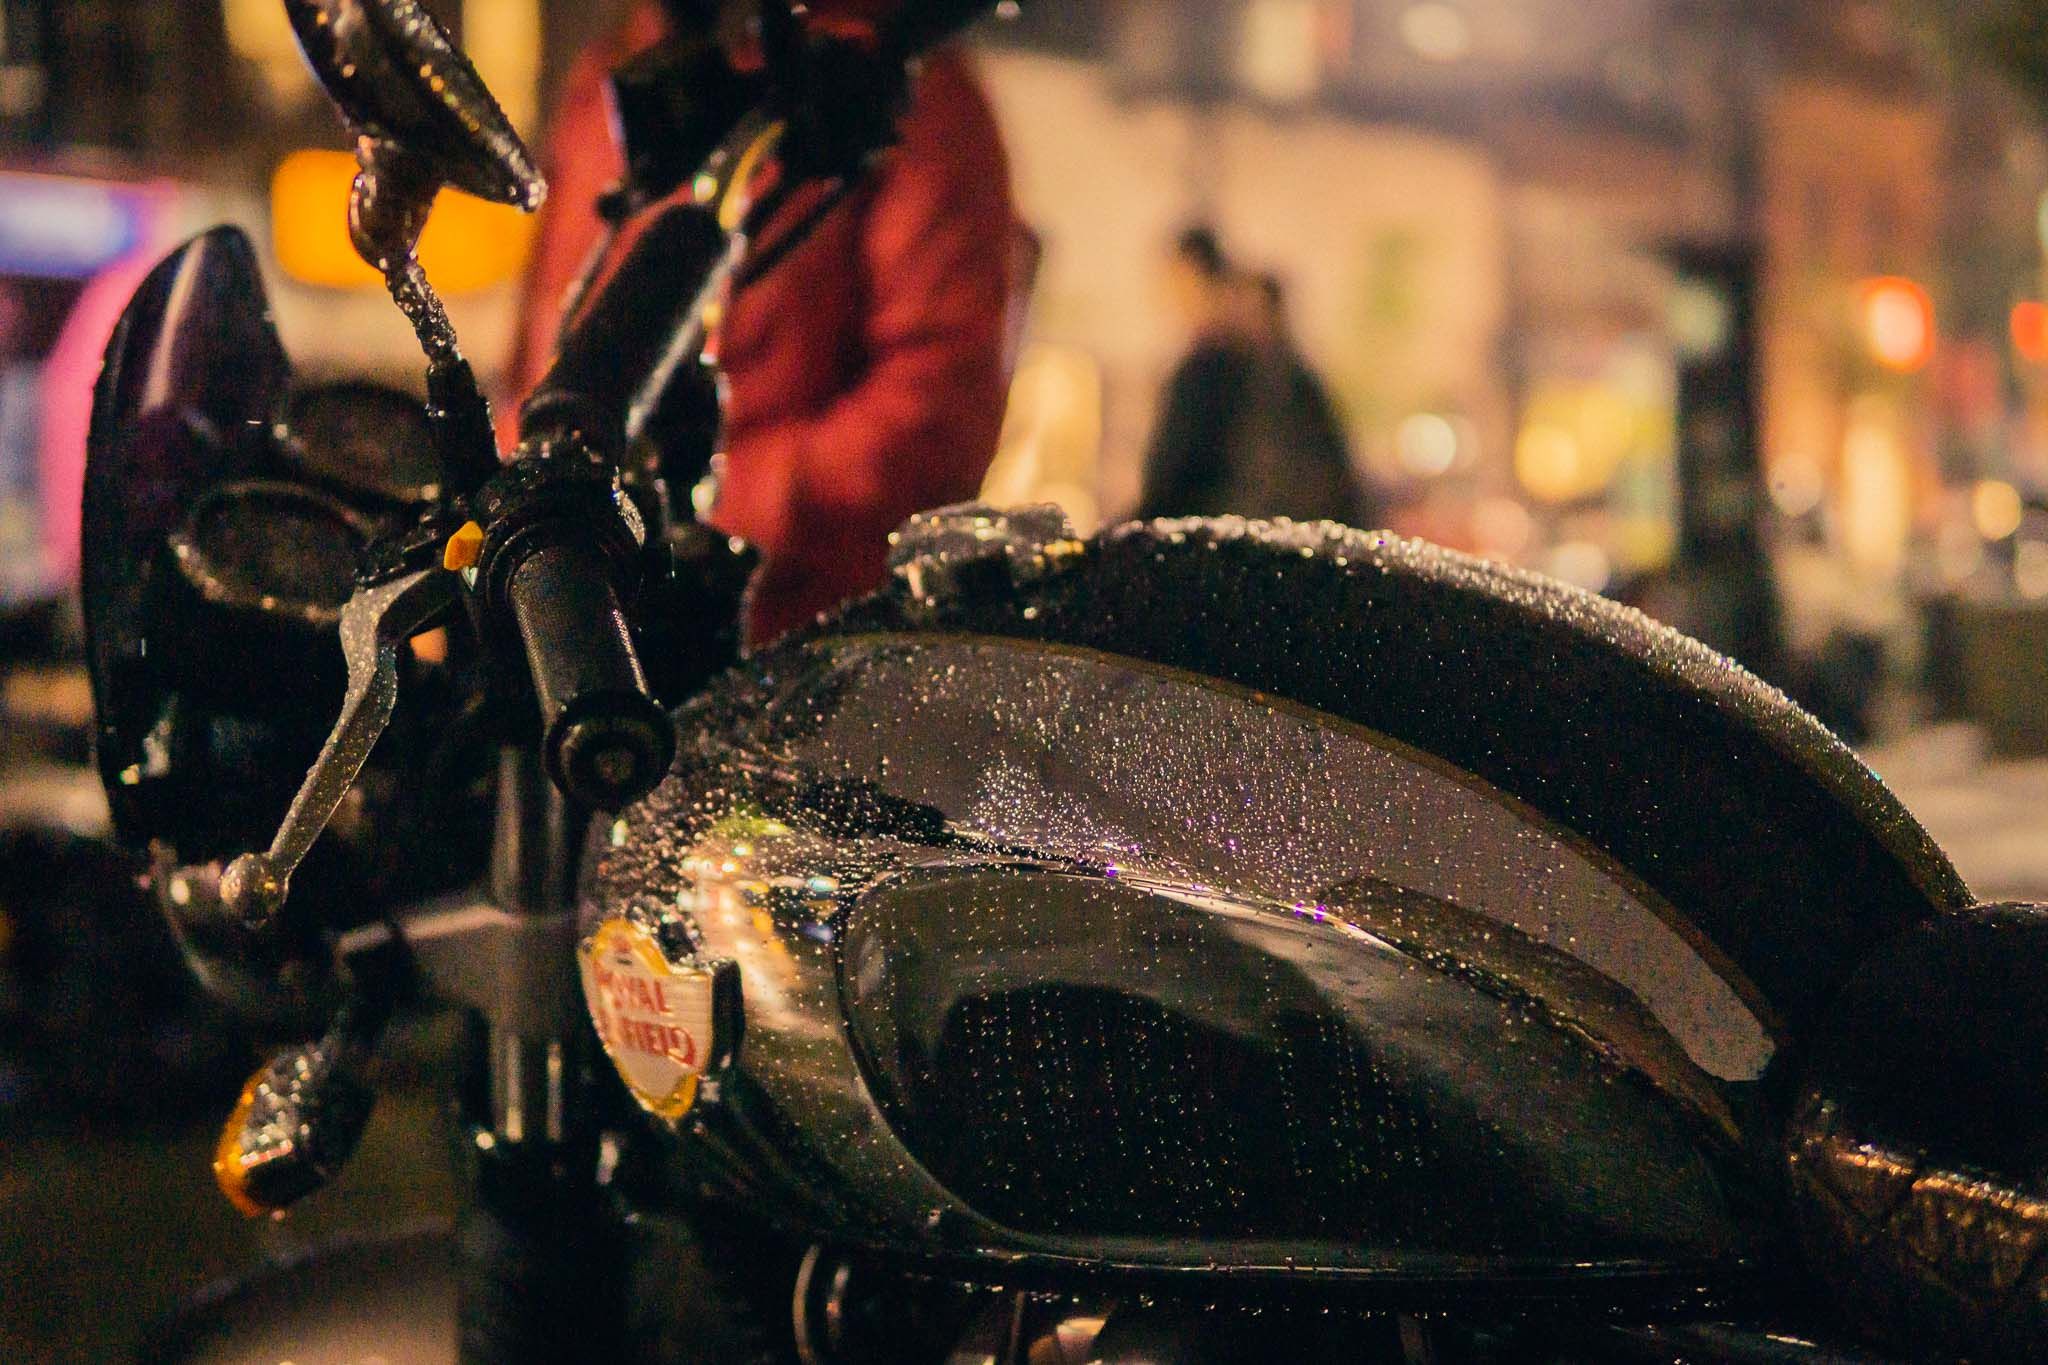 Bikers aren't fond of rain, but for some reason, we photogs love it...